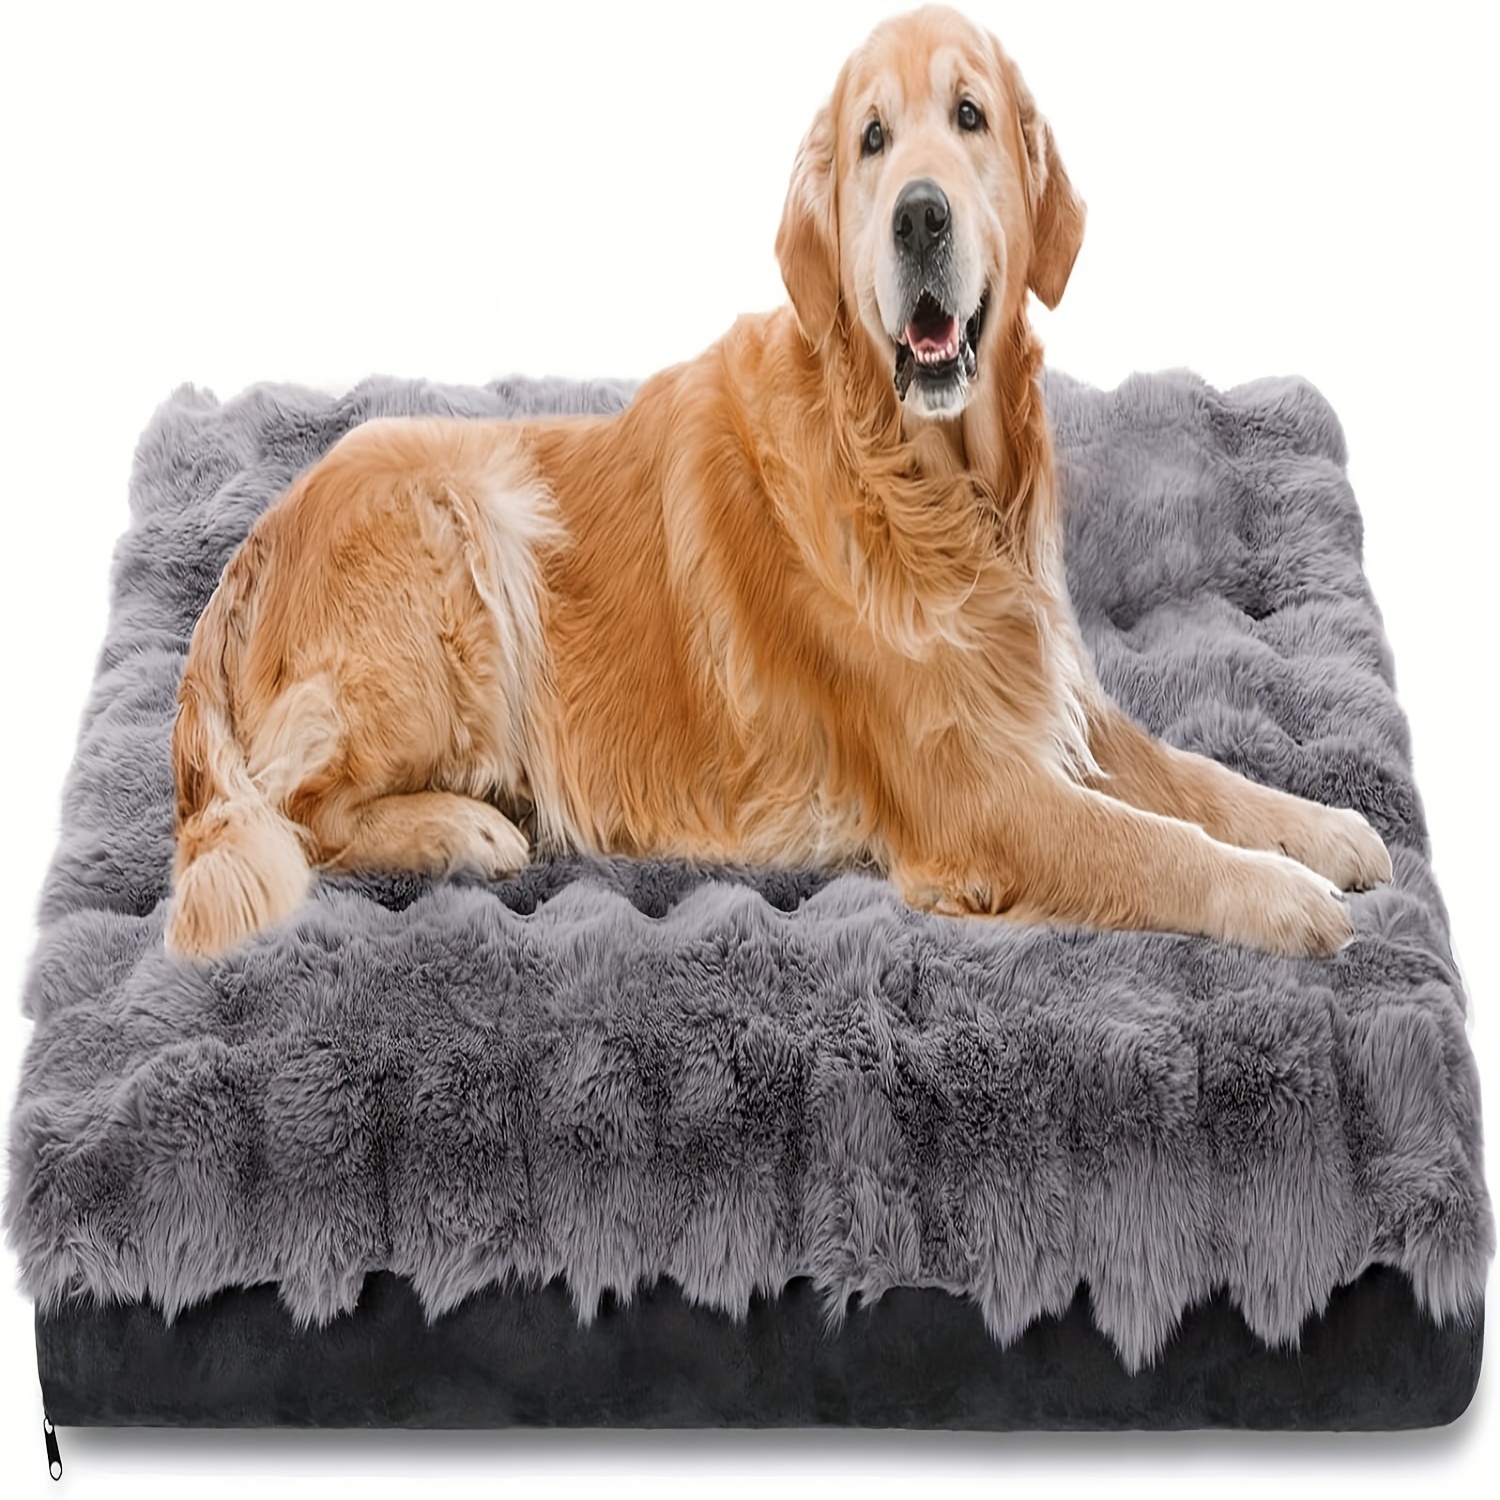 

Large Dog Bed, Soft Plush Faux Fur Fluffy Pet Pad With Removable Washable Cover And Anti-slip Bottom, Machine Washable, 42x30x4 Inches